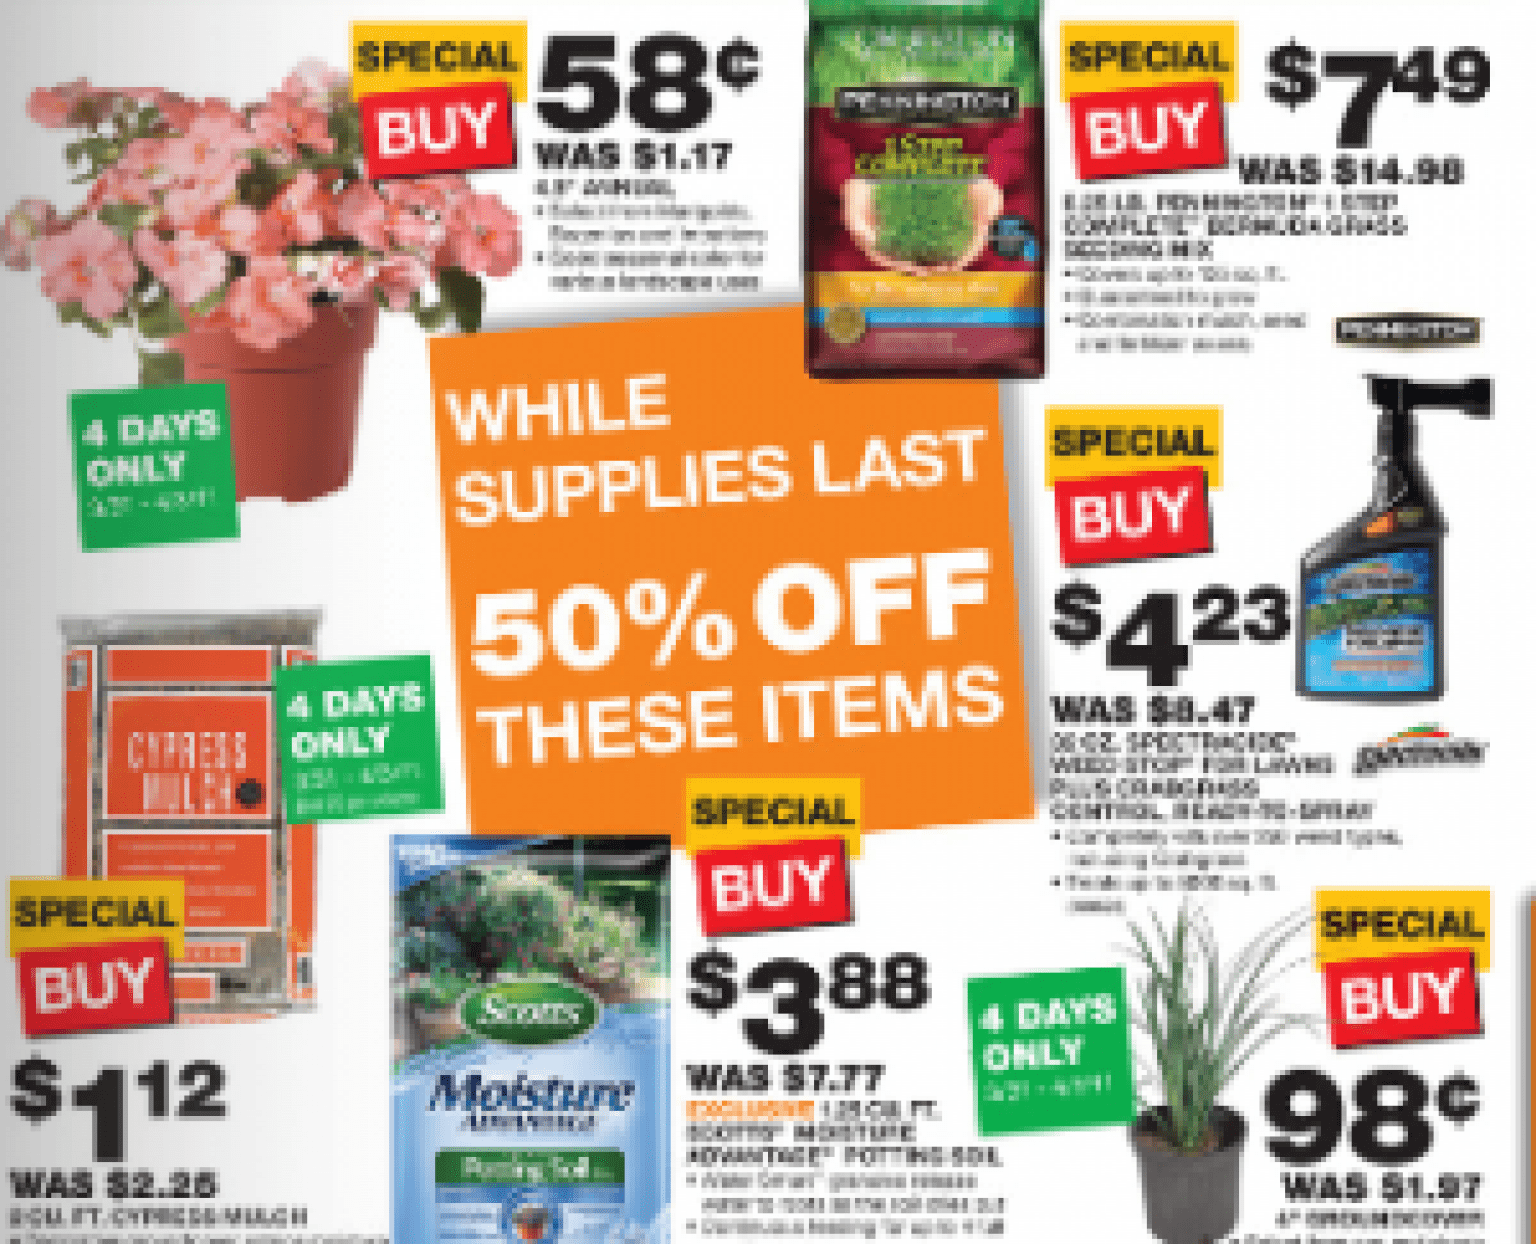 Home Depot Black Friday Sale Prices Mulch only 1.12!